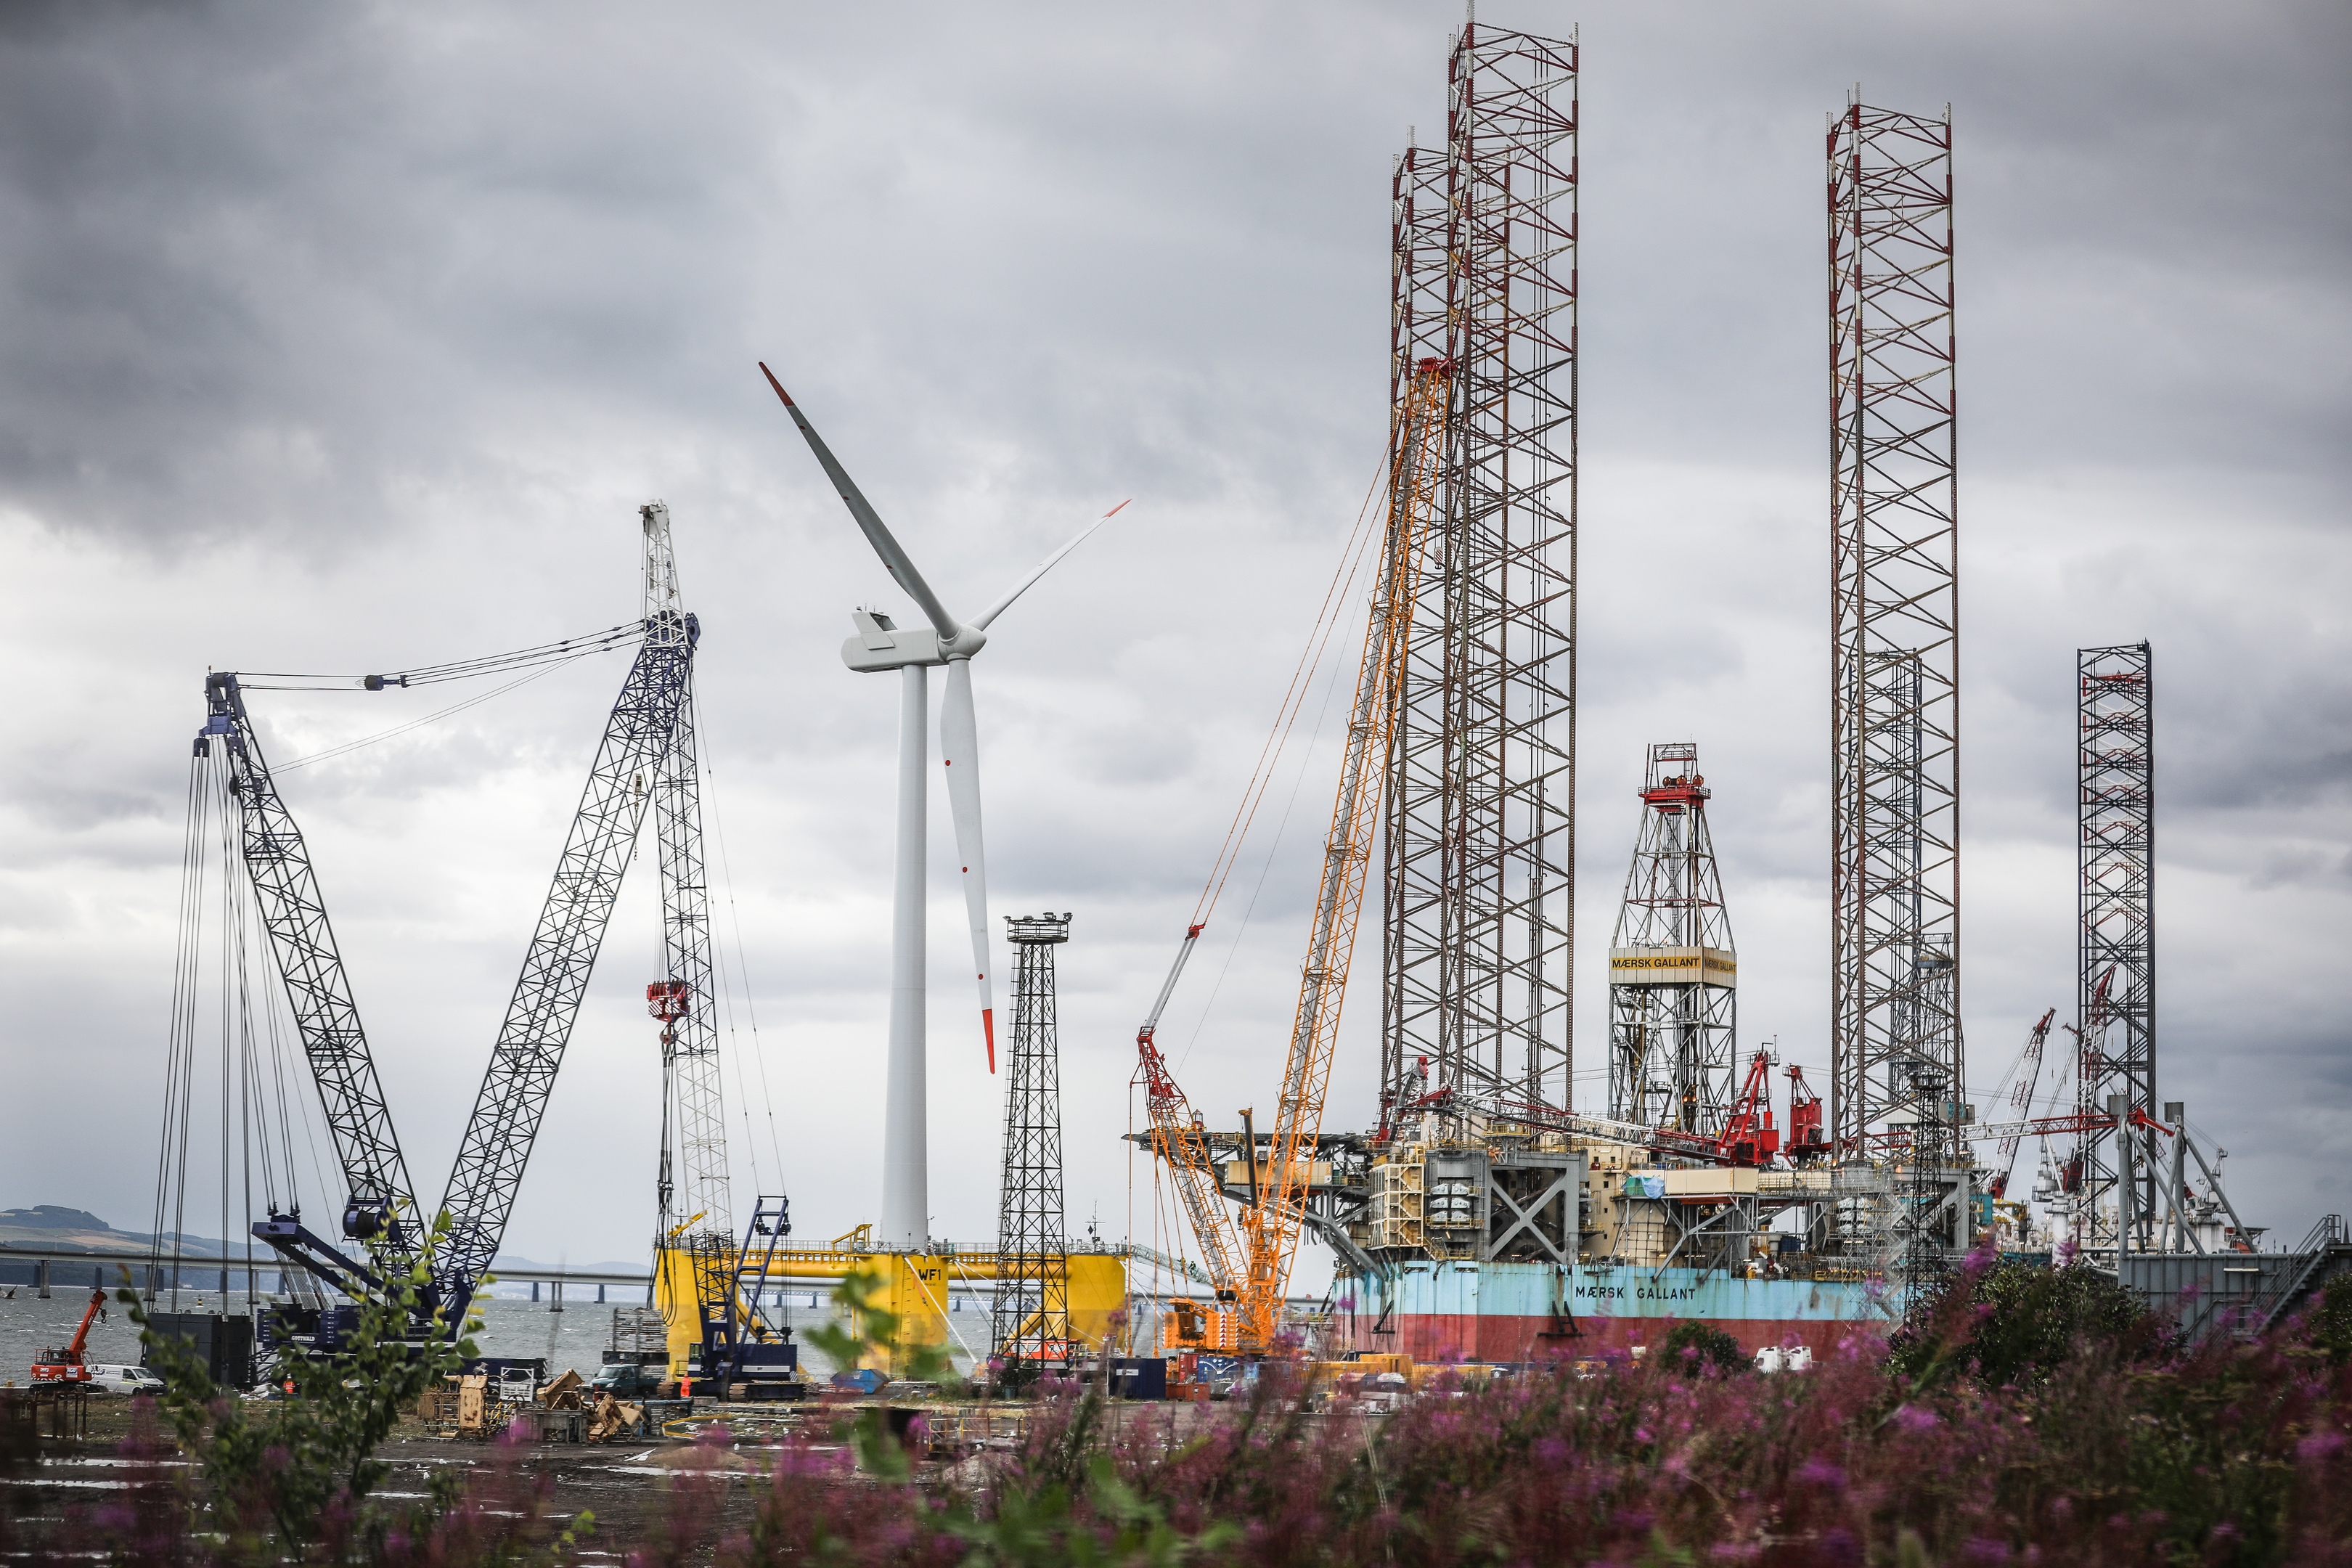 Courier/Tele News. Dundee story. CR0002827 . Work has been ongoing at Dundee Docks / Forth Ports Dundee, on a wind turbine for an offshore windfarm. Pic shows; the wind turbine at Forth Ports, Dundee. Friday, 27th July, 2018.